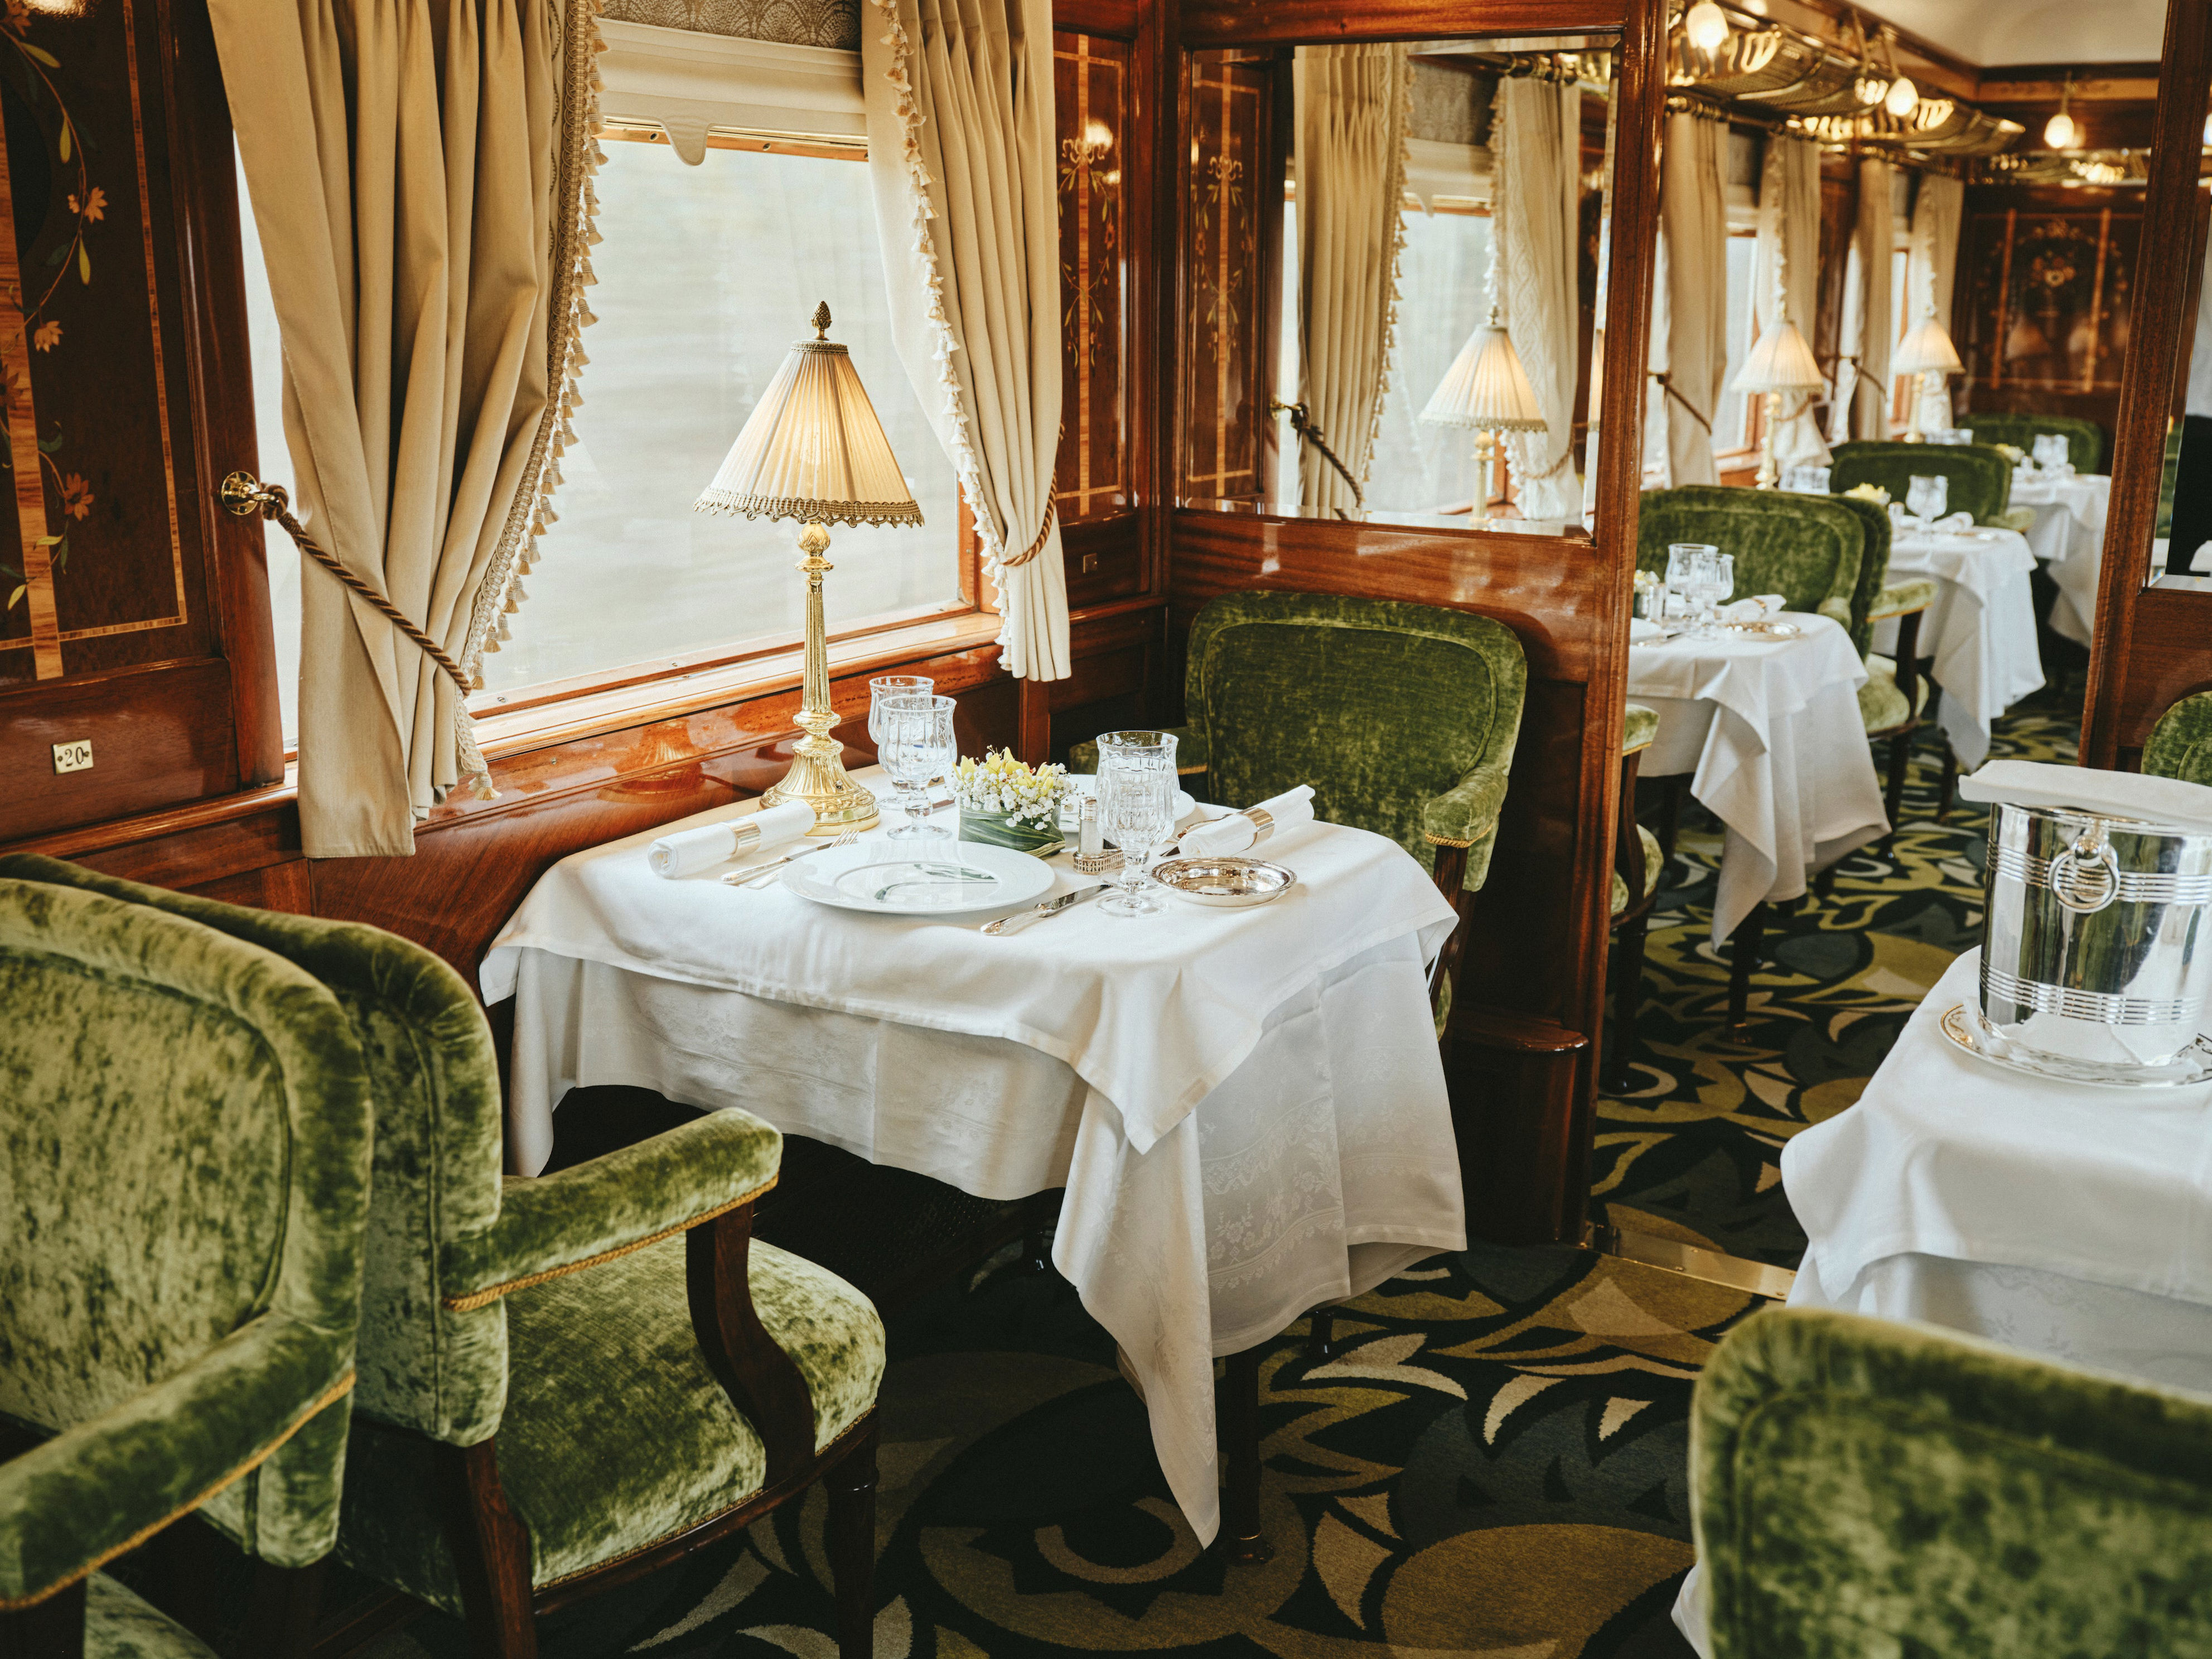 venice simplon-orient-express: all aboard the most glamorous train journey in the world